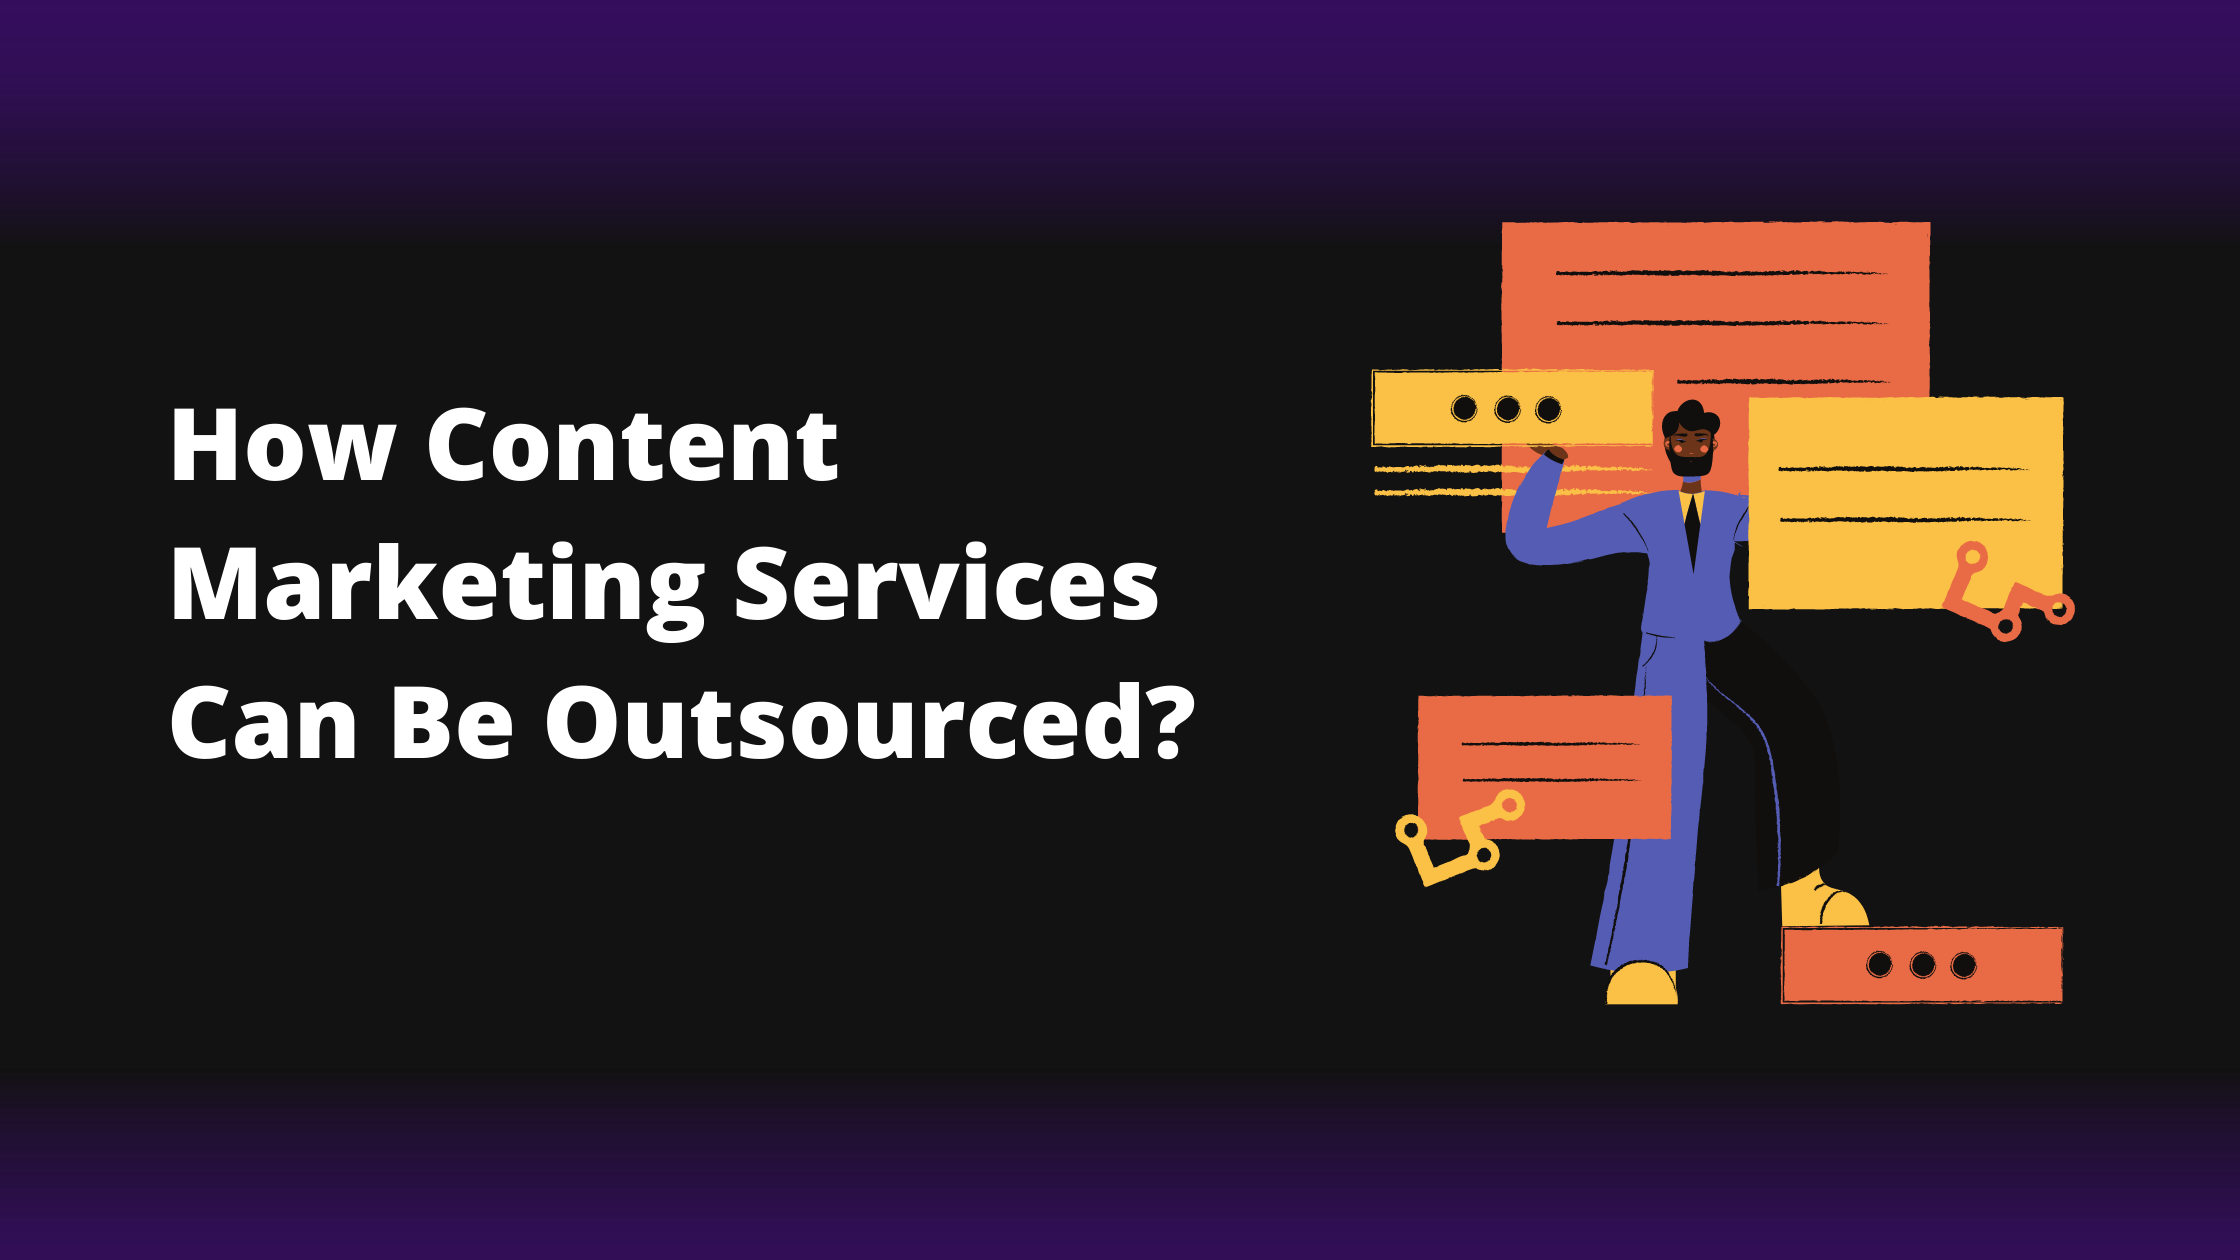 How Content Marketing Services can be outsourced?